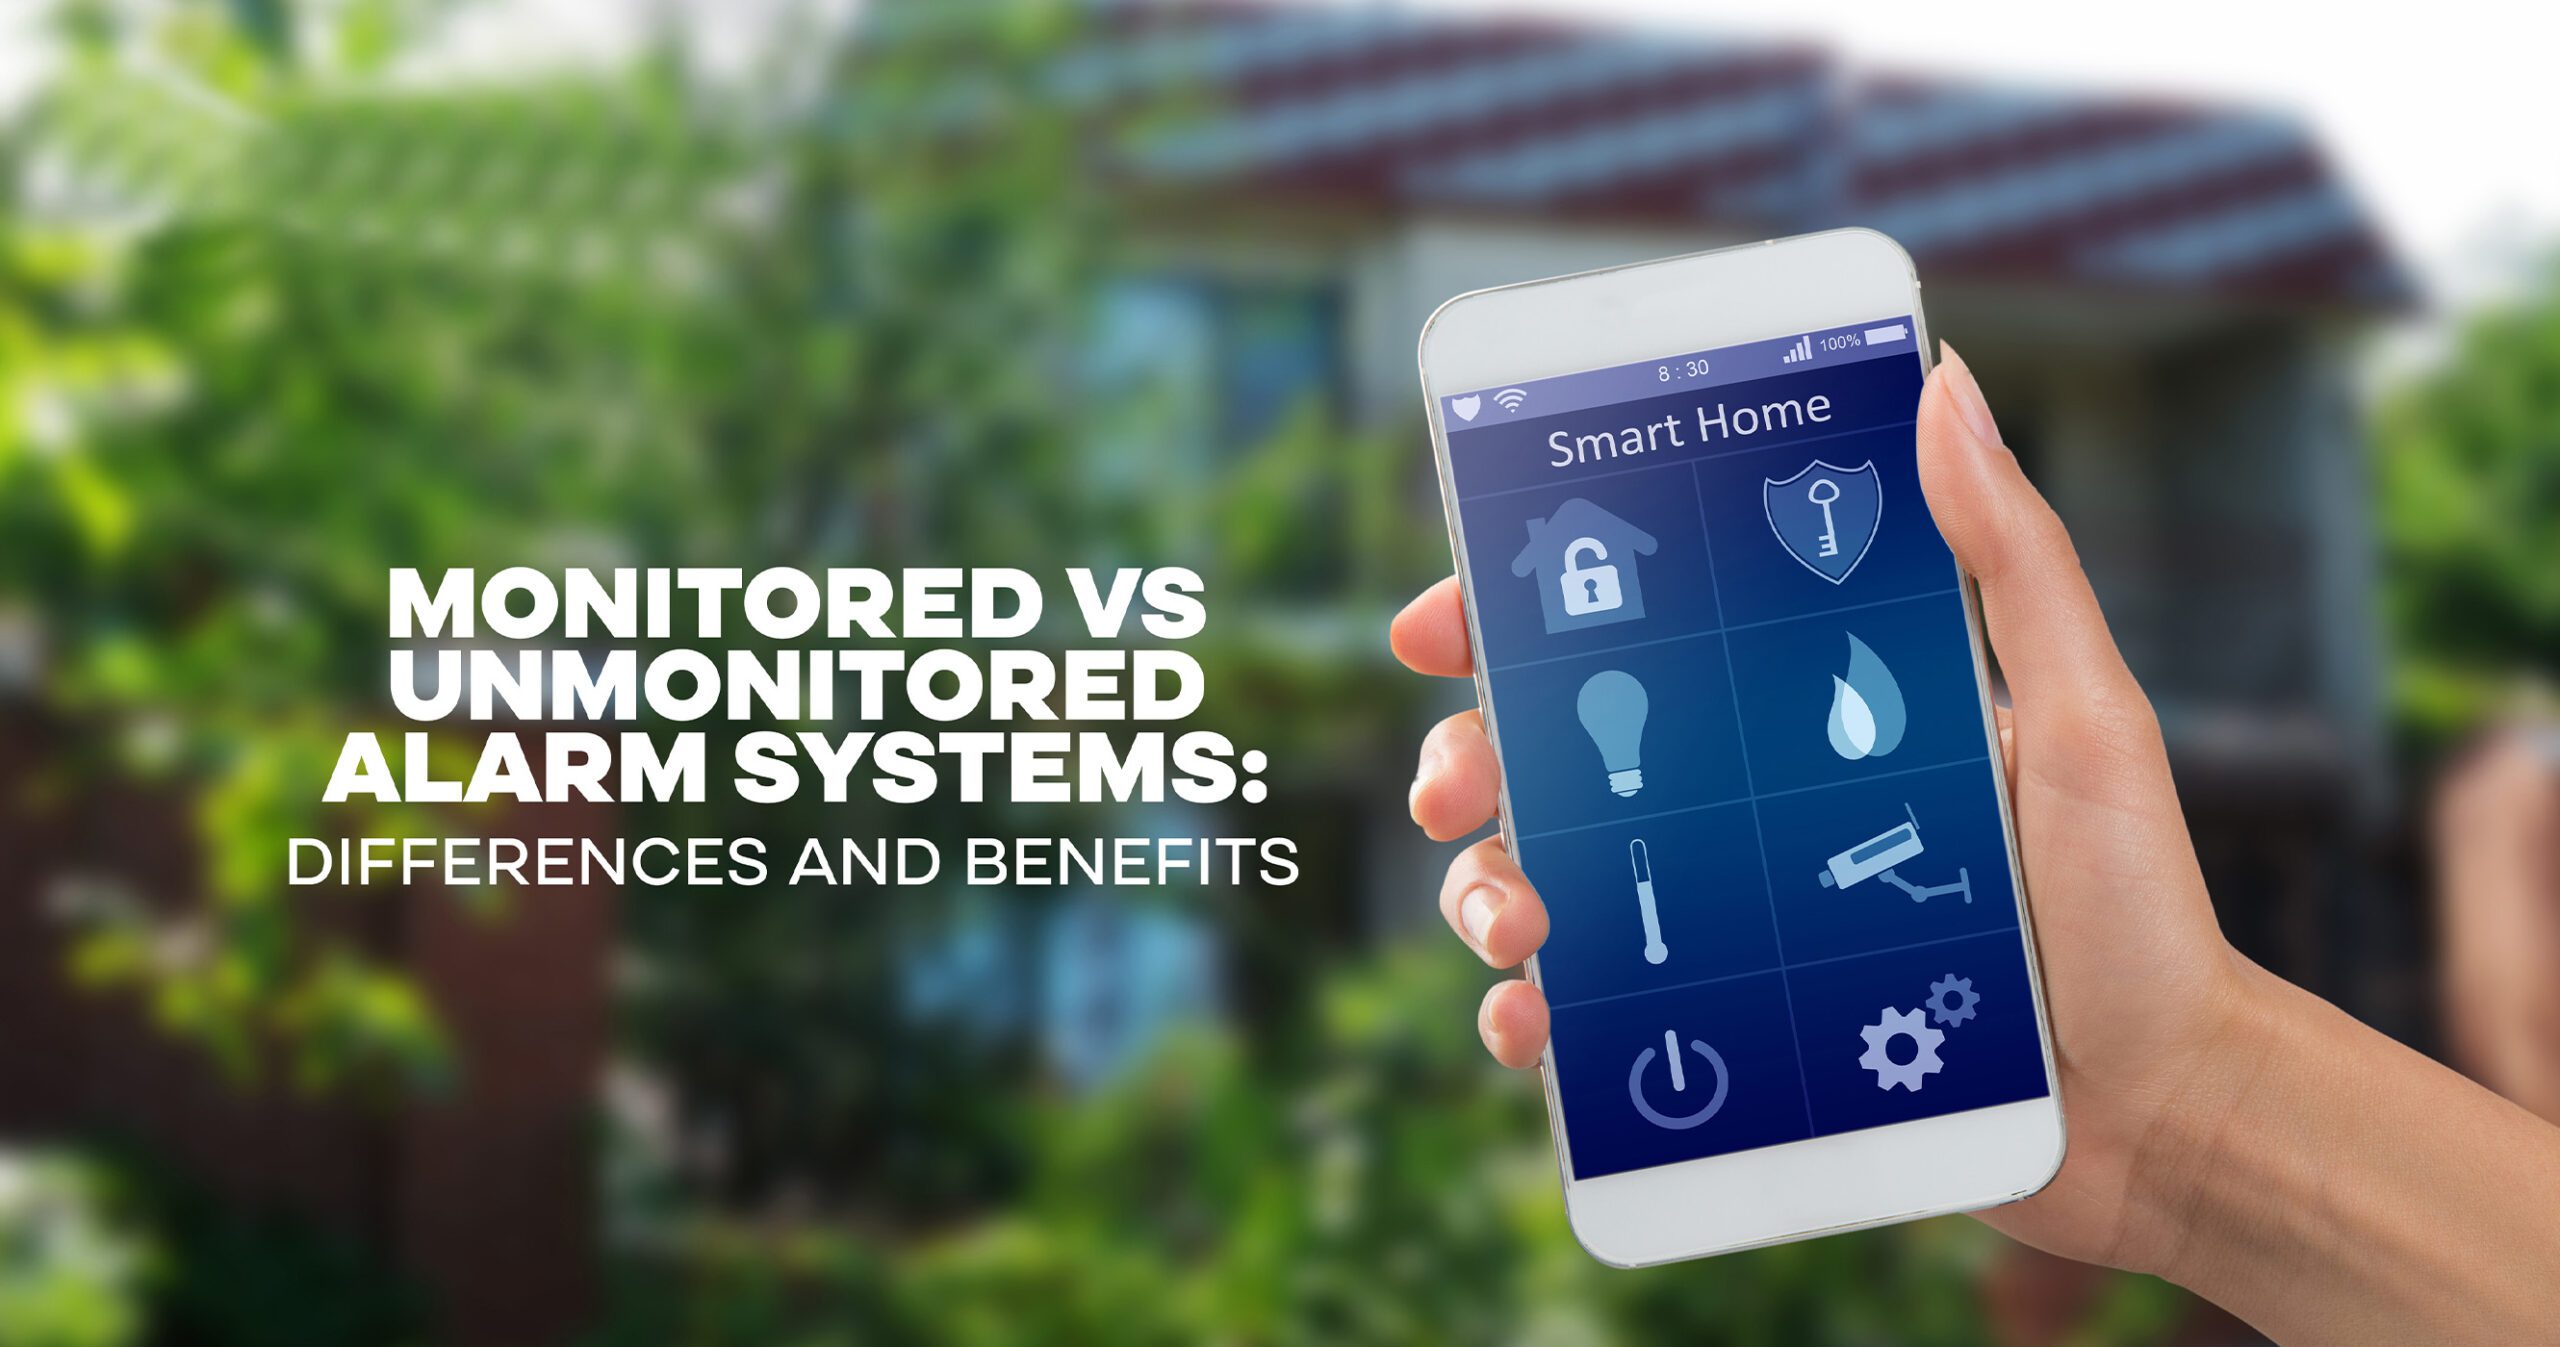 Featured image for “Monitored vs Unmonitored Alarm Systems: Differences and Benefits”